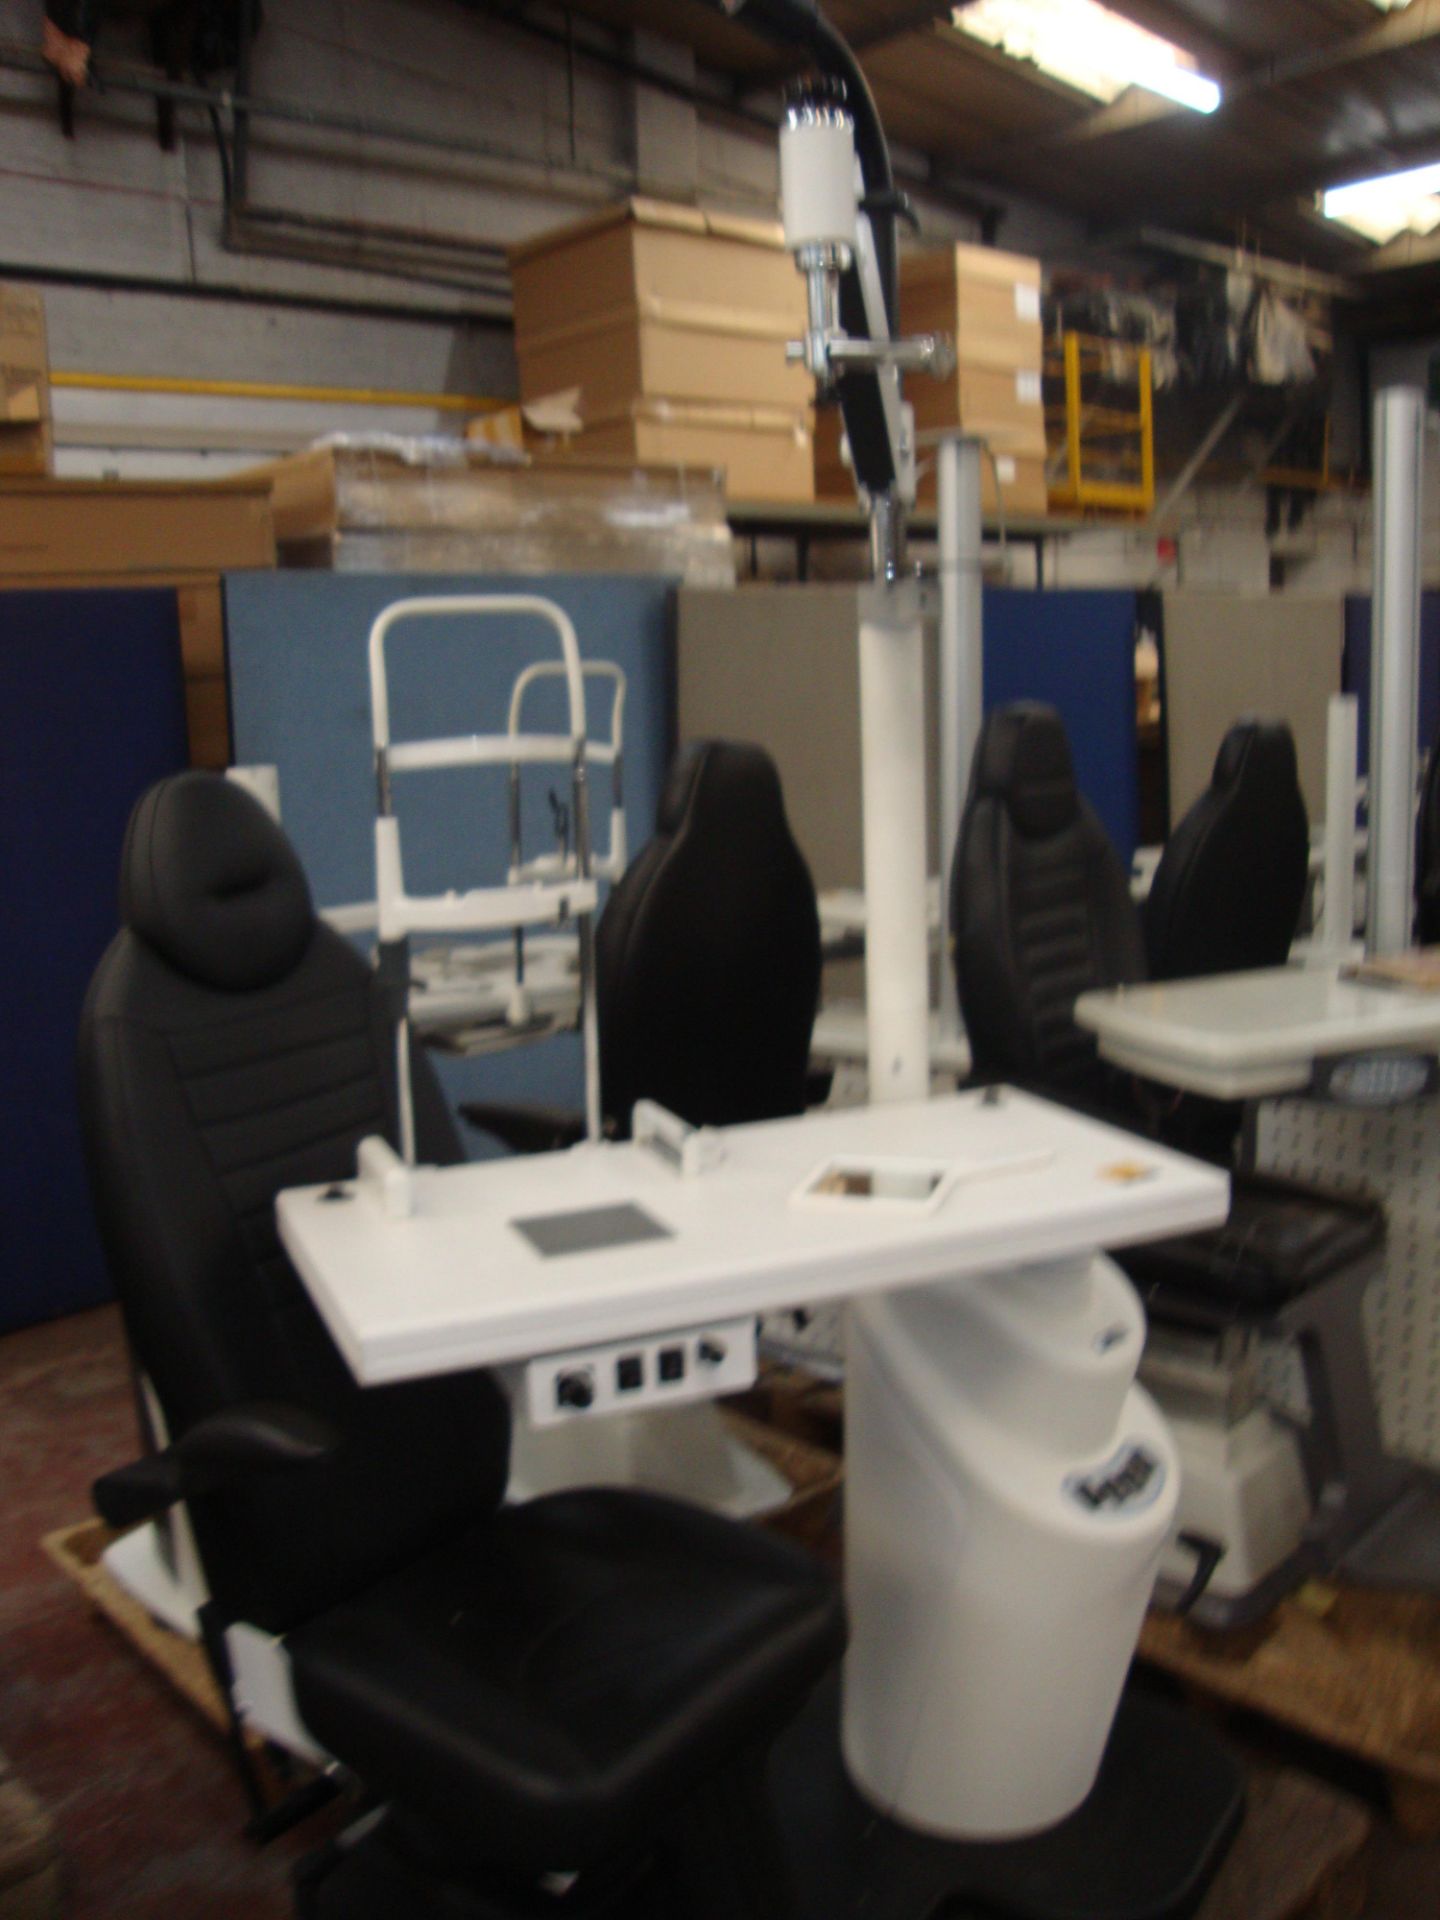 Combi unit testing chair & table. Please note that this sale consists of a large number of testing